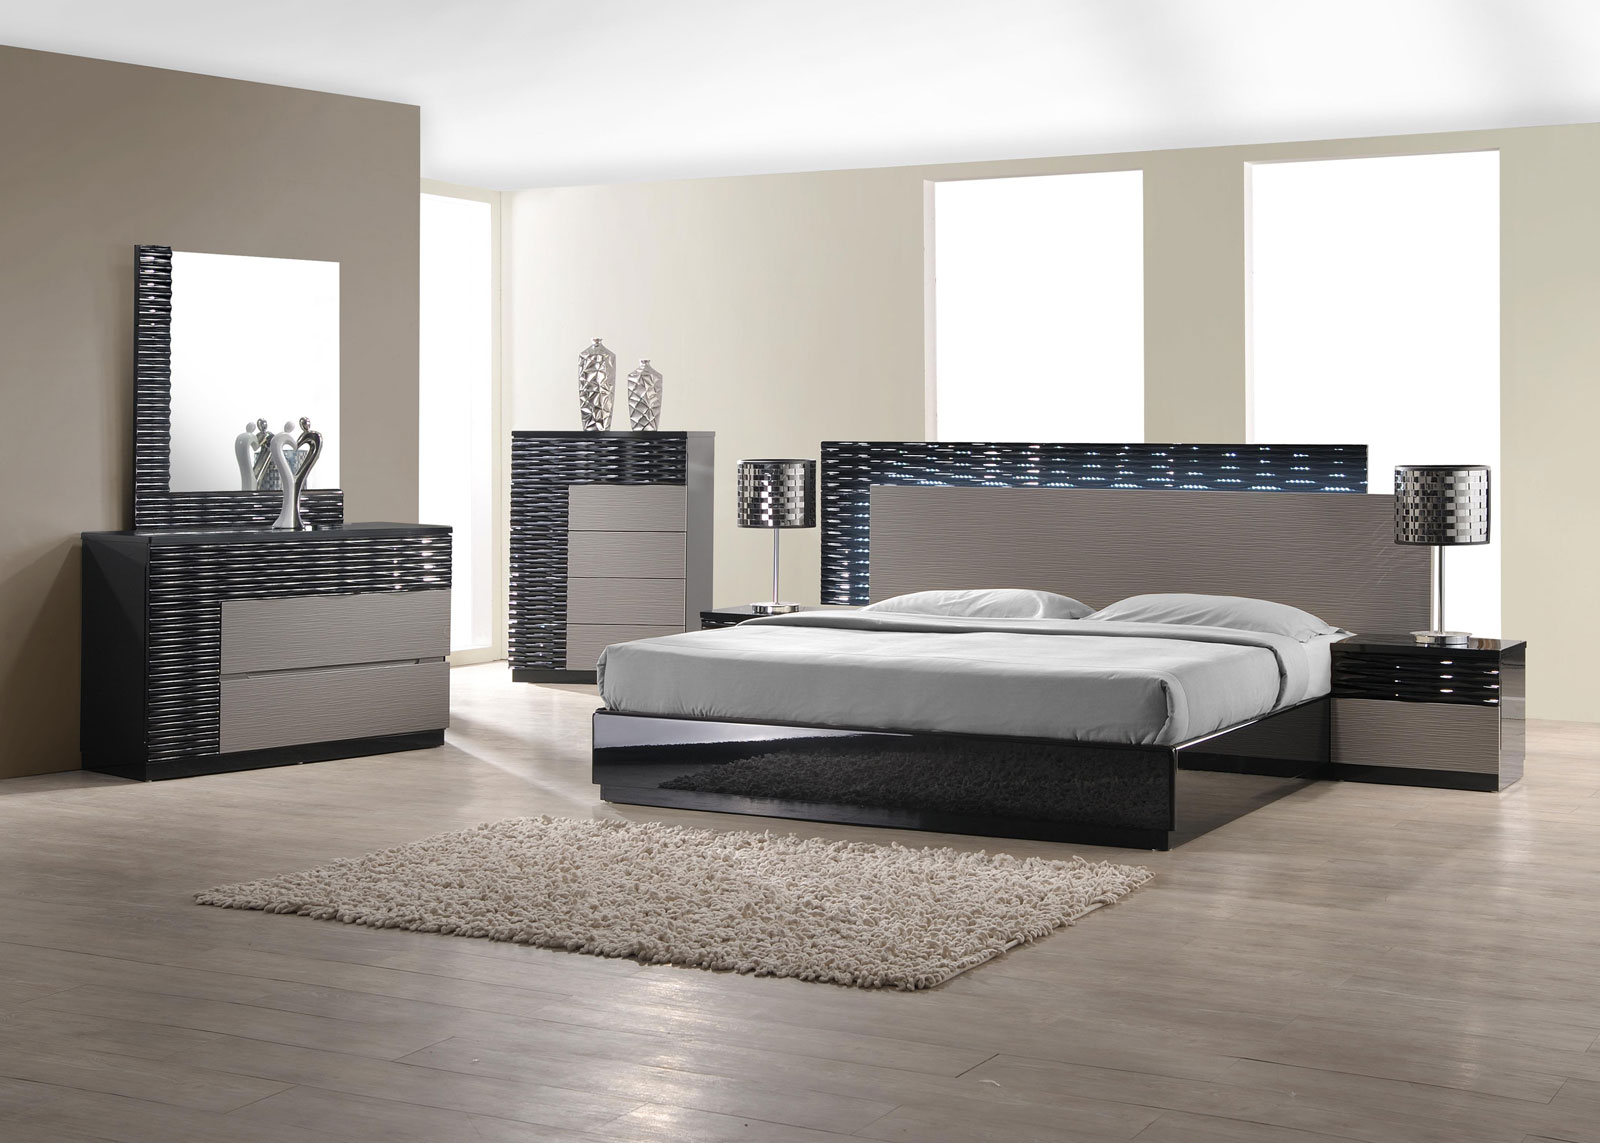 Black Bedroom Elegant Enchanting Black Bedroom Furniture In Elegant Bedroom With Queen Bed And Twin Night Lamps On Nightstands Furnished With Vanity And Completed With Soft Rug Bedroom Black Bedroom Furniture For The Elegant Sense